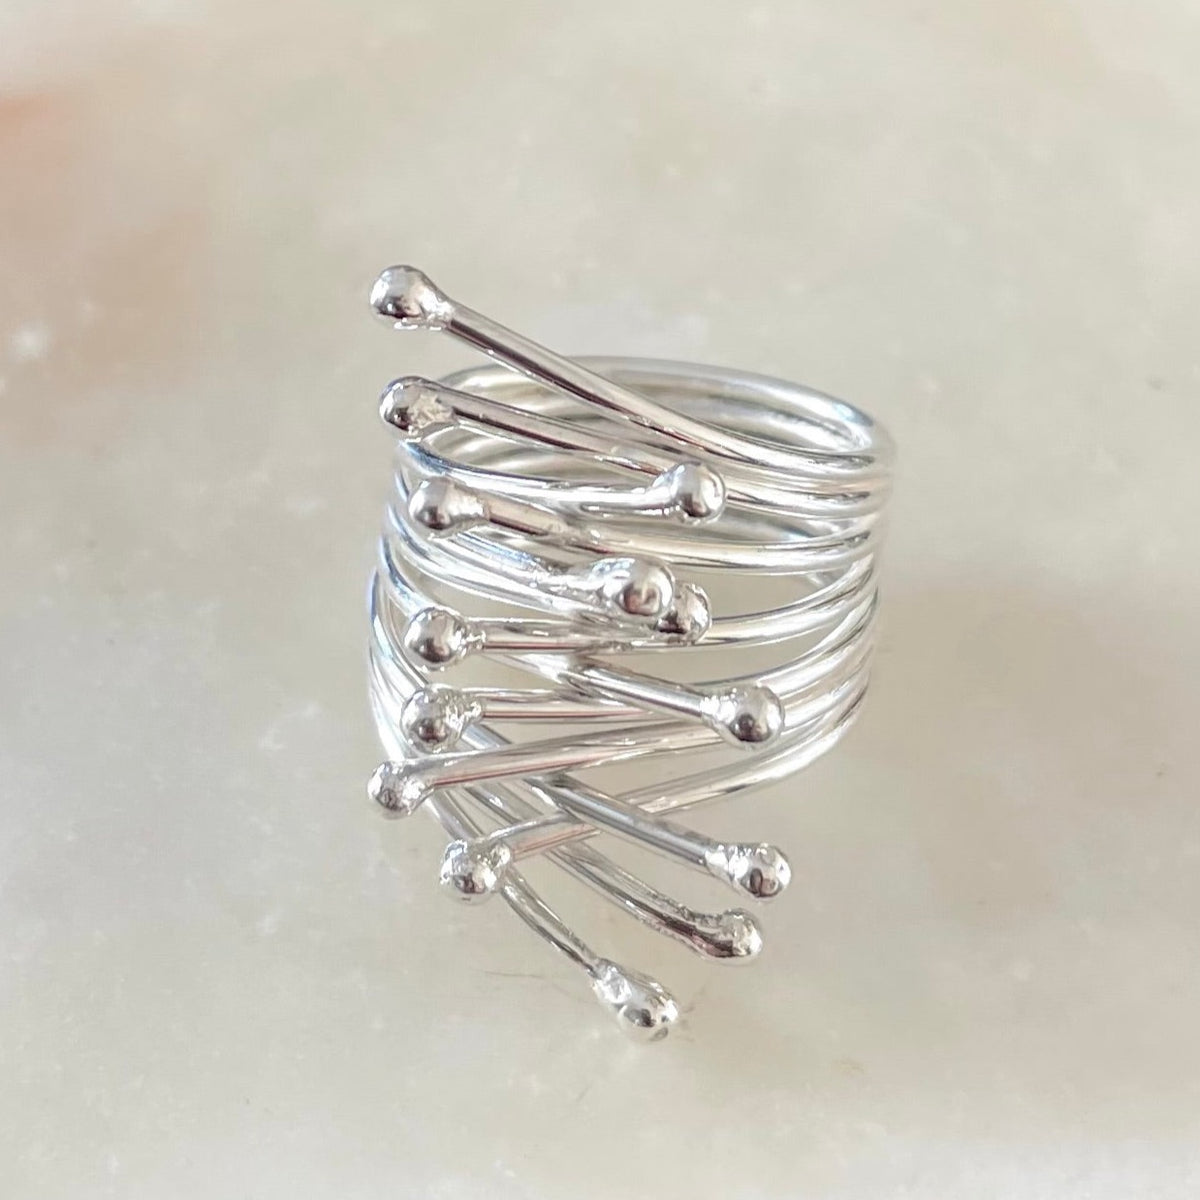 Rings Embrace, circone & 950 silver, adjustable